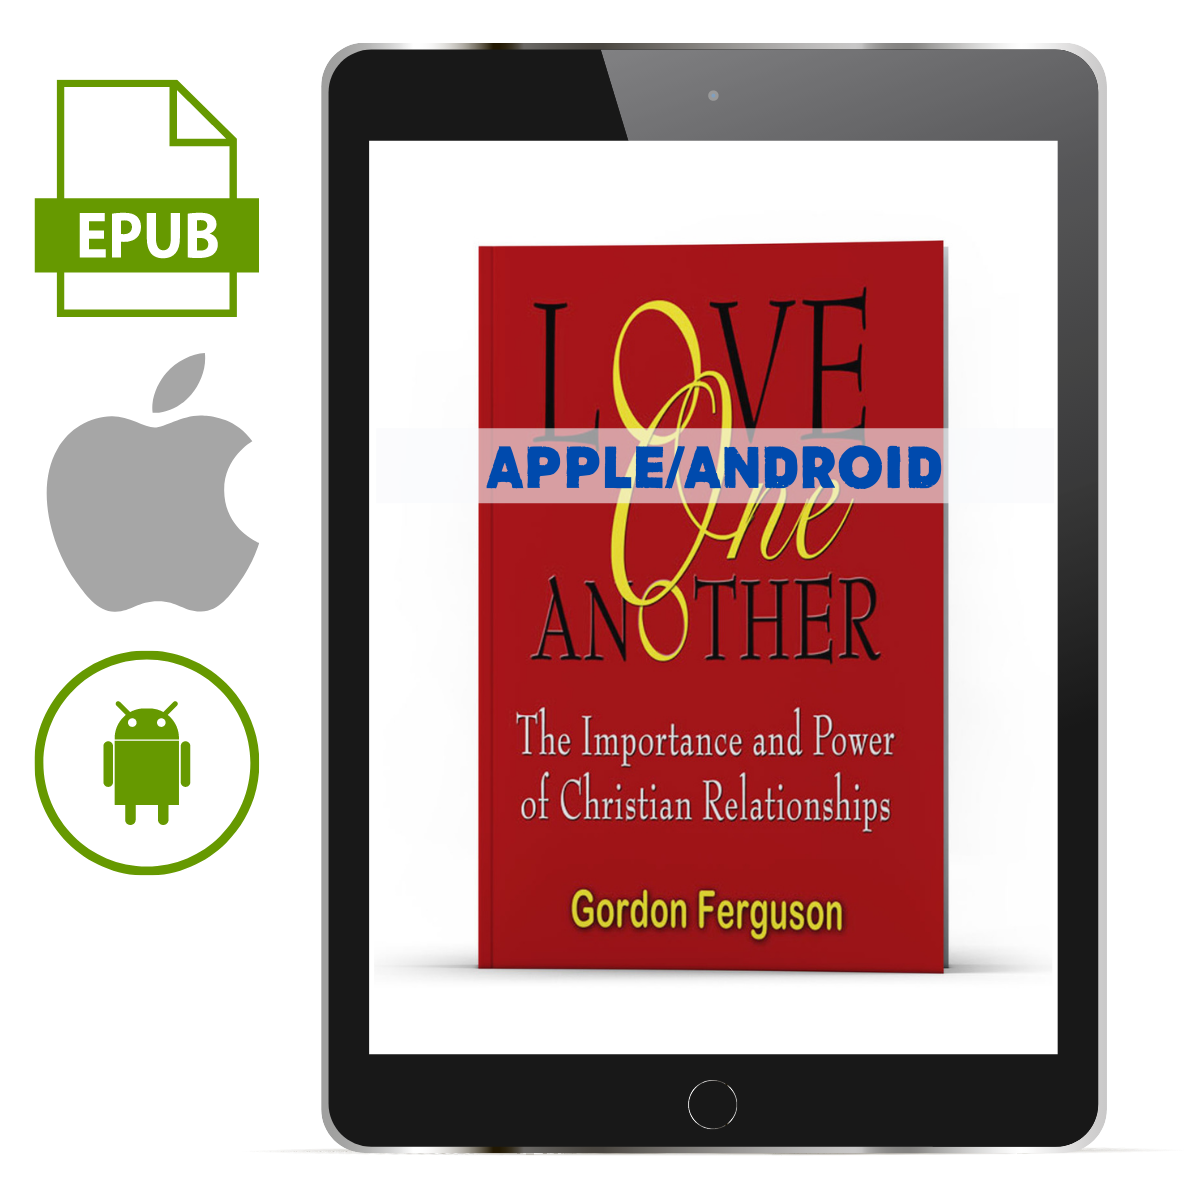 Love One Another (Apple/Android) - Illumination Publishers